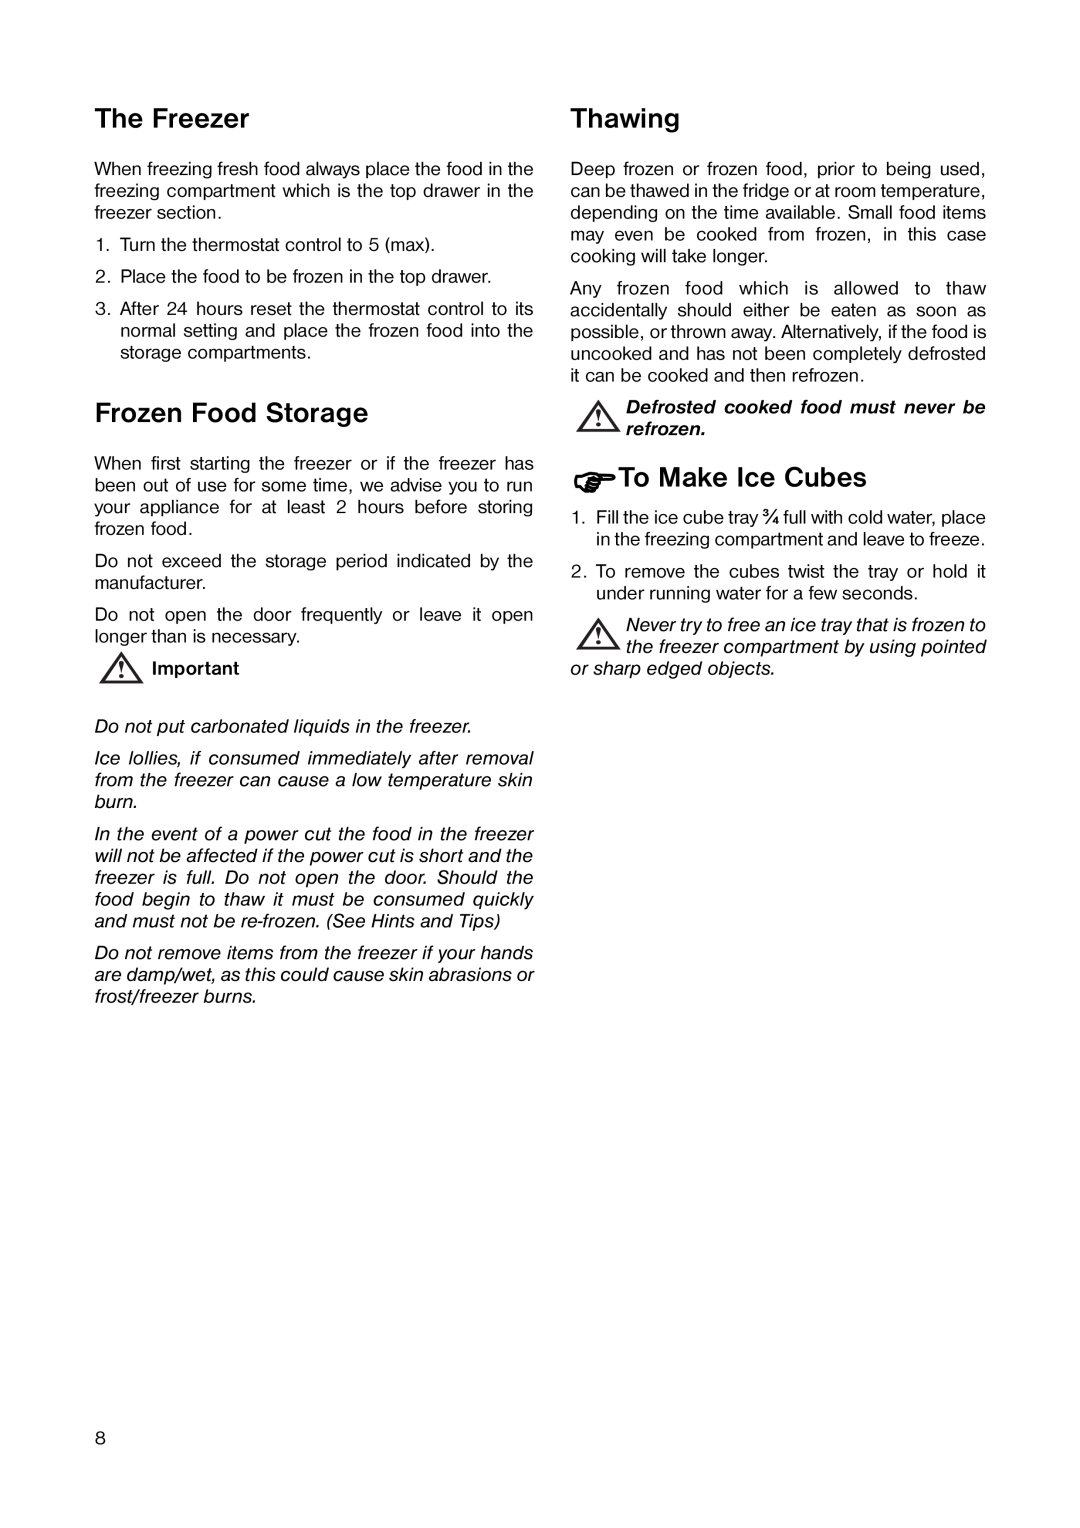 Tricity Bendix TB 090 FF, TB 116 FF installation instructions The Freezer, Frozen Food Storage, Thawing, ΦTo Make Ice Cubes 